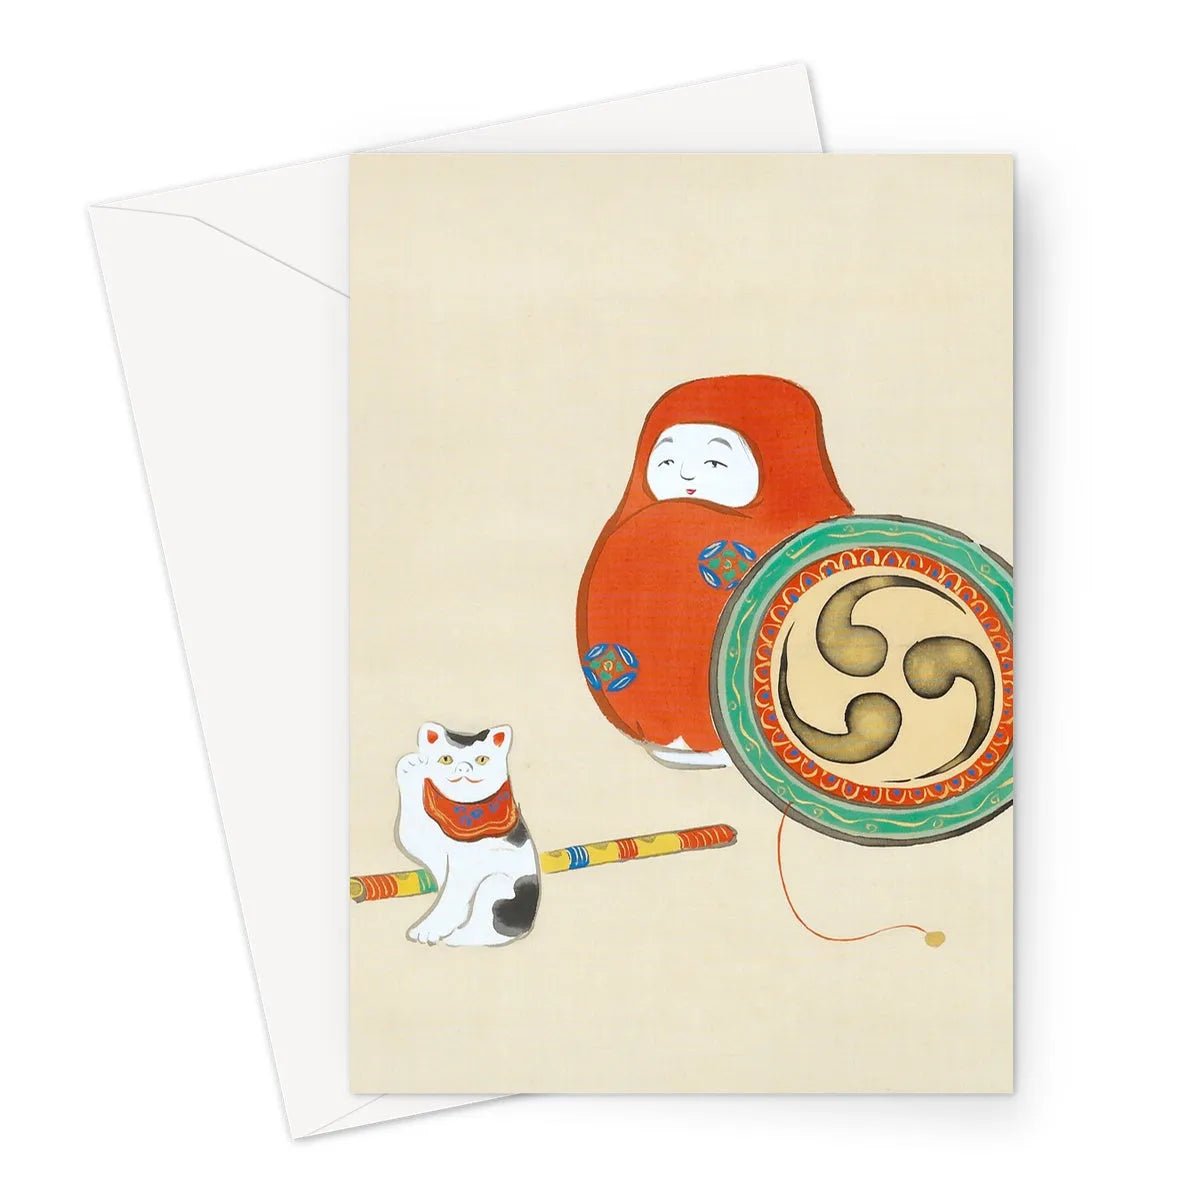 Toys By Kamisaka Sekka Greeting Card - A5 Portrait / 1 Card - Greeting & Note Cards - Aesthetic Art